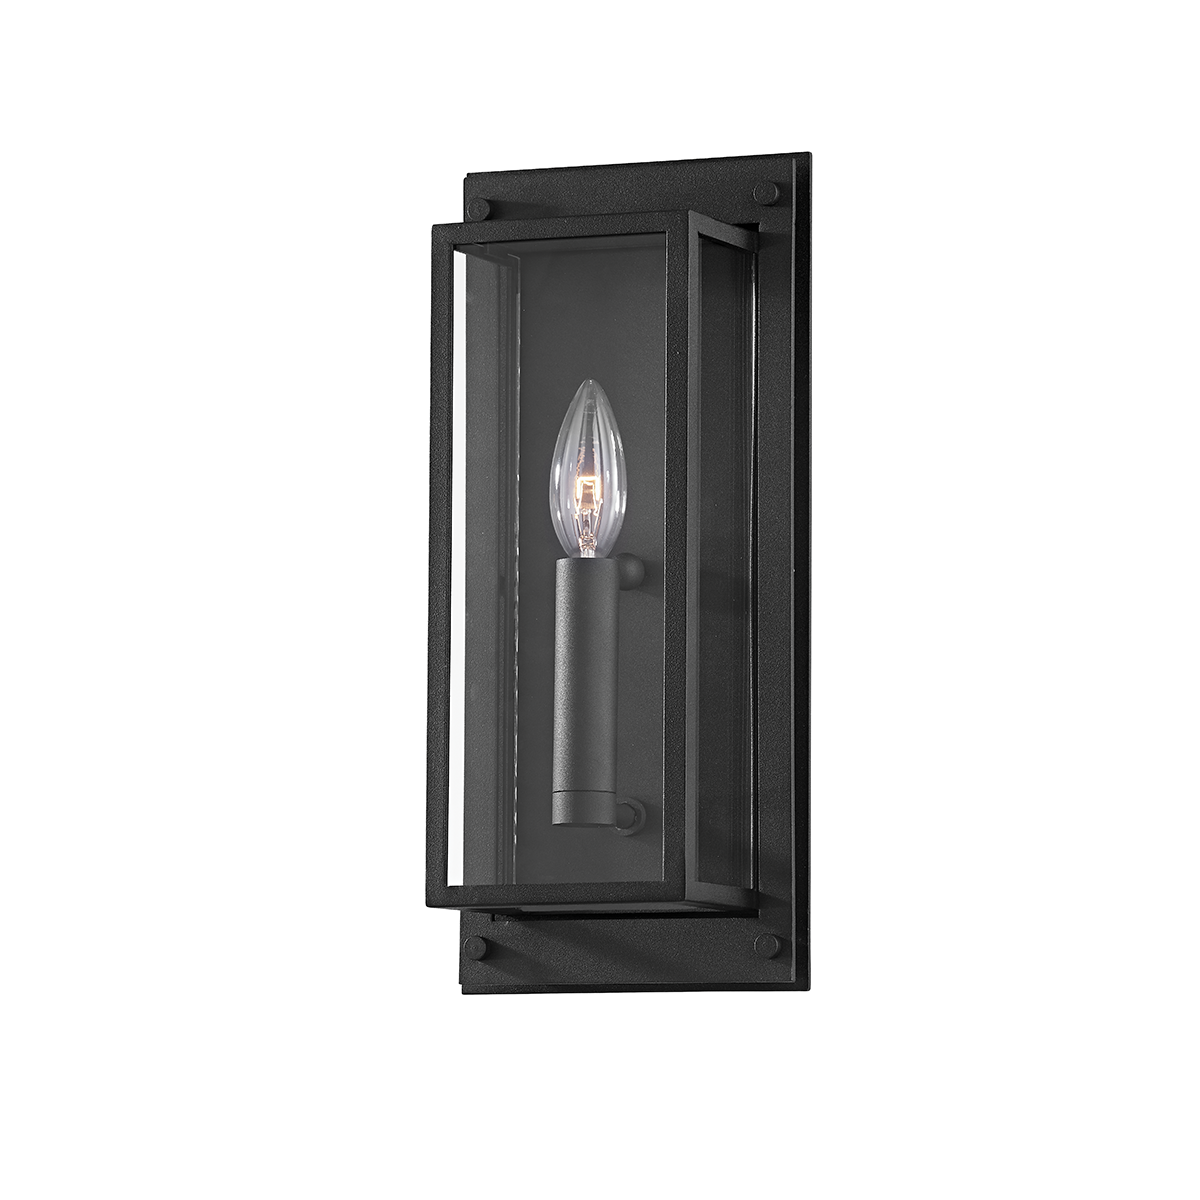 Troy Lighting 1 LIGHT SMALL EXTERIOR WALL SCONCE B9101 Outdoor l Wall Troy Lighting TEXTURE BLACK  